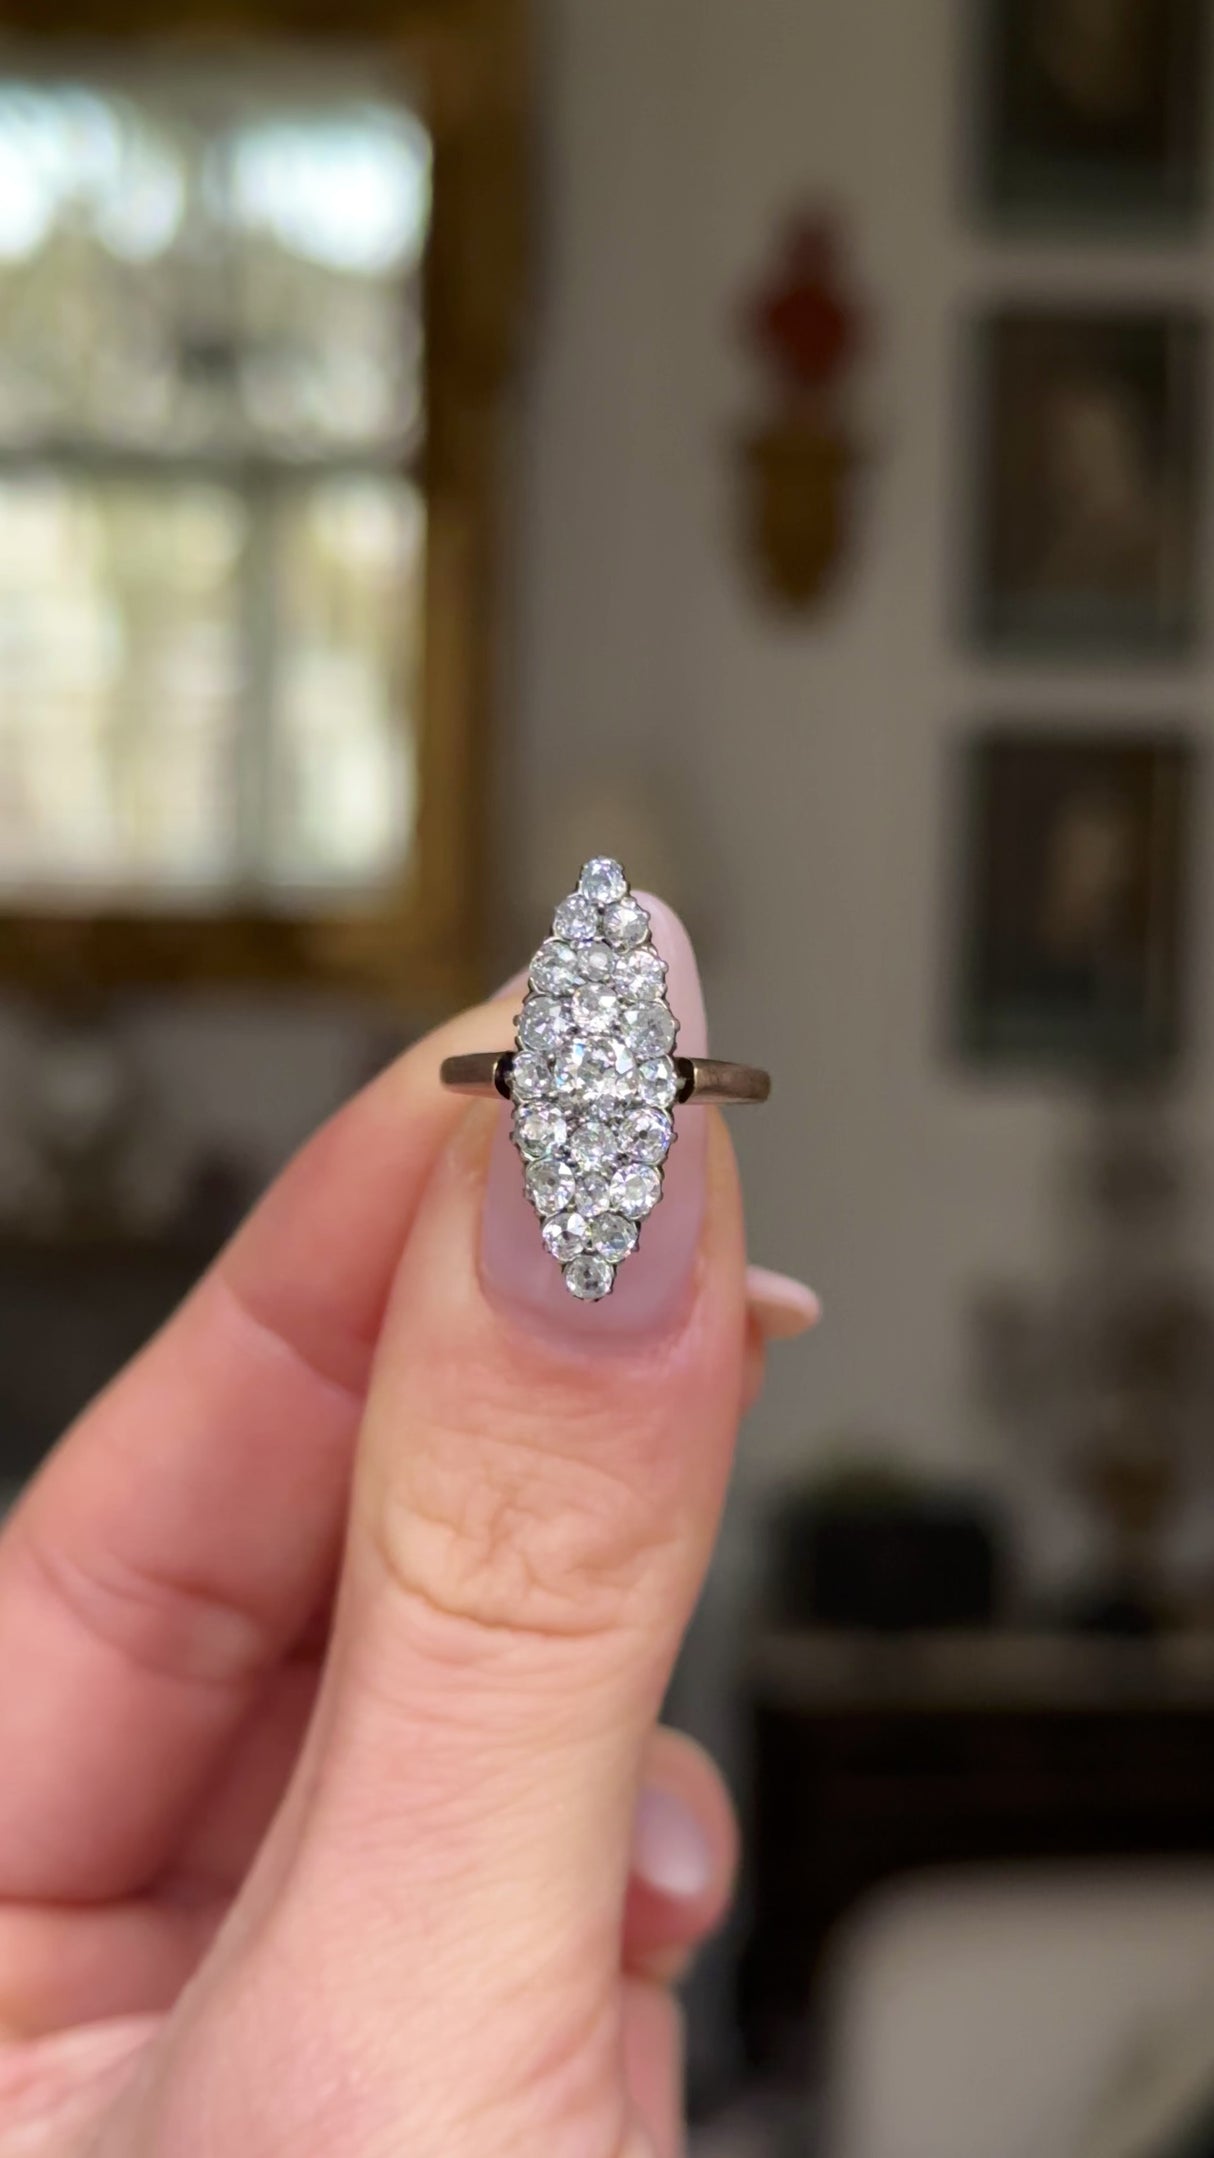 Antique diamond navette ring held in fingers and moved around to give perspective.